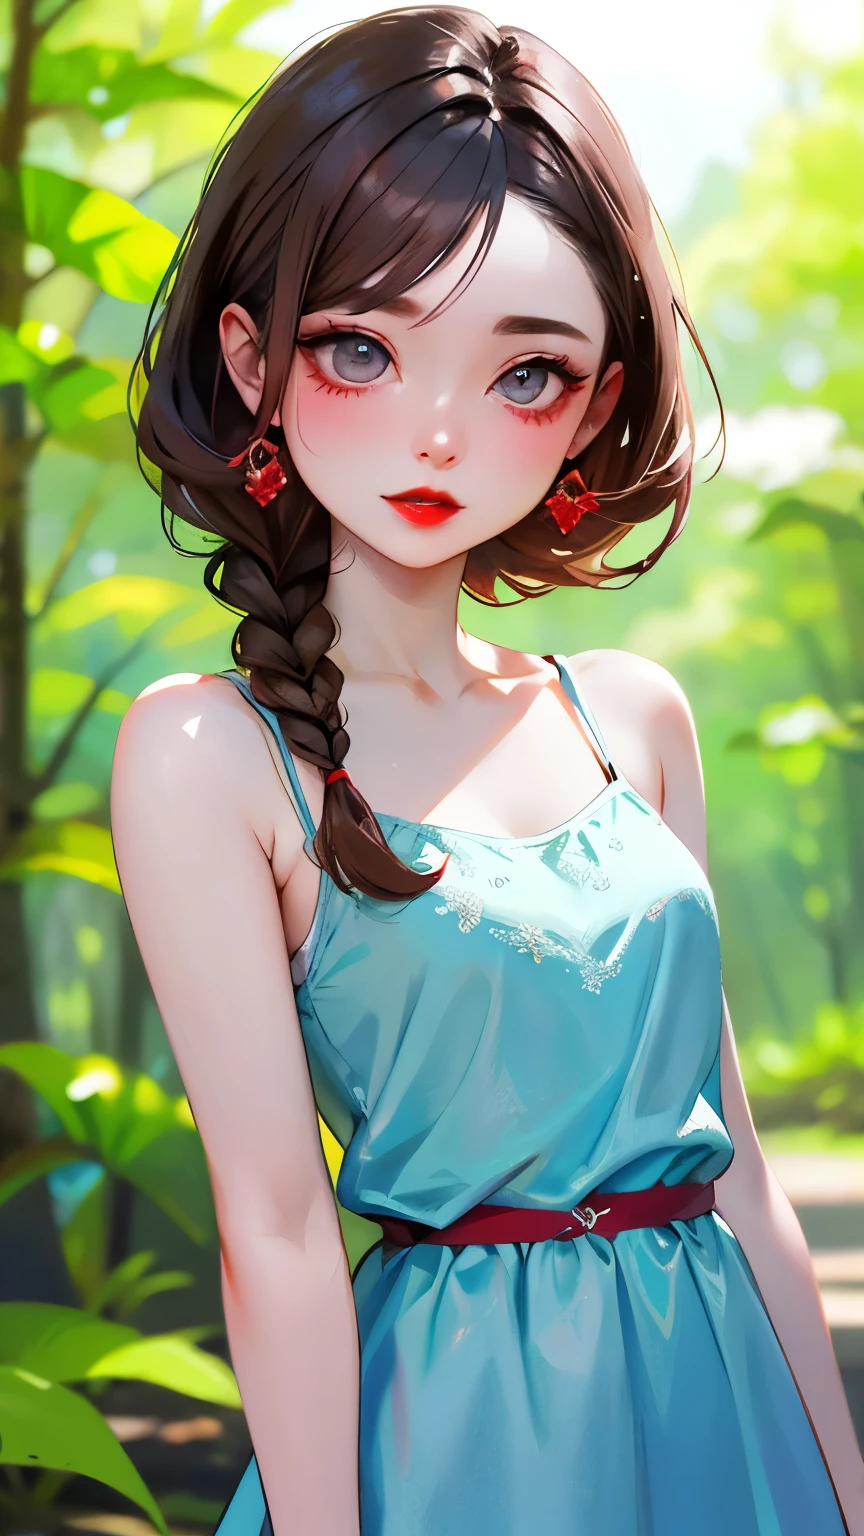 highest quality、masterpiece、Perfect Anatomy、Upper body from the knee up、One Girl、Cute Face、Red eyeshadow、Red lipstick、Red cheeks and nose、White skin、Grey Eyes、Brown Hair、Braided Hair、Highly detailed hairstyle、Camisole dress、Light blue dress、Blurred Background、Forest bathing、Promenade、High quality details、Portrait